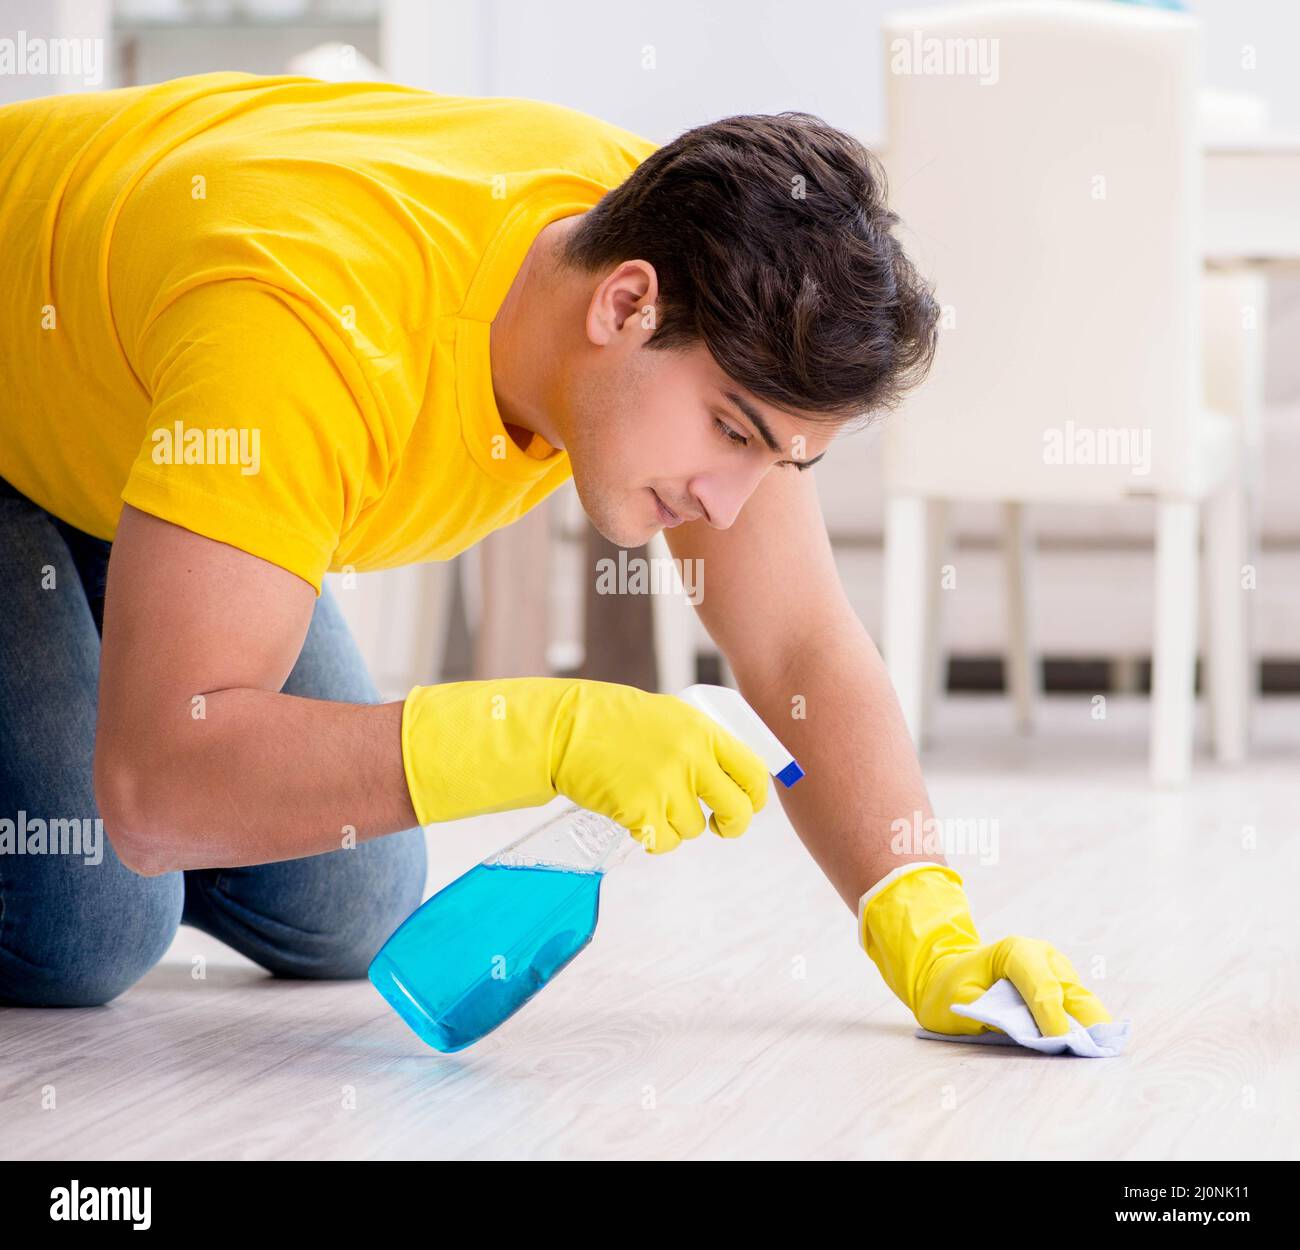 Man cleaning the house helping his wife Stock Photo